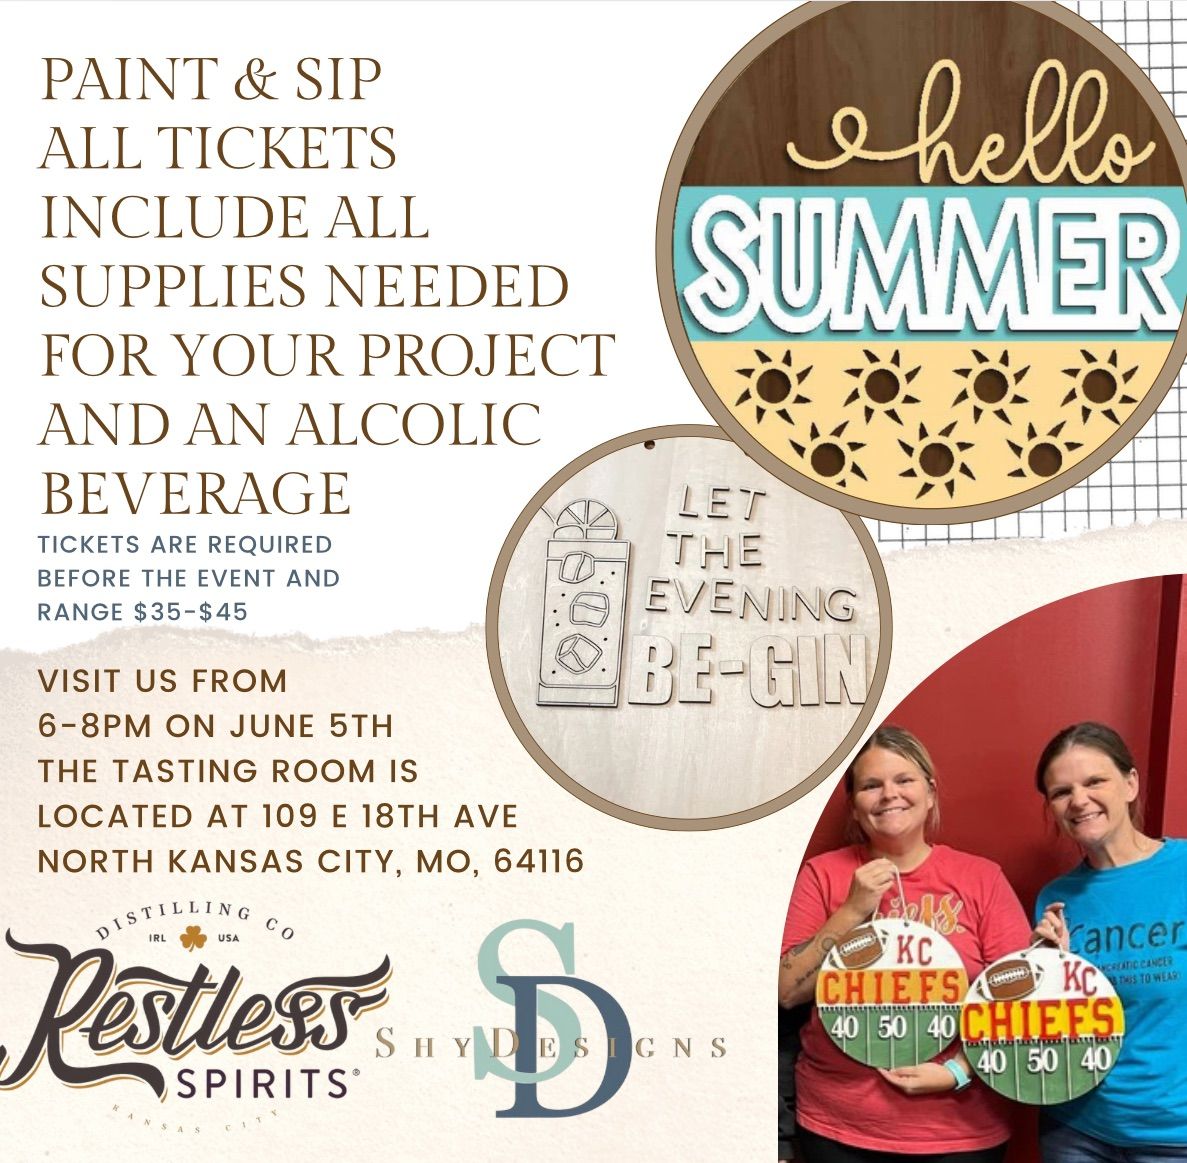 Restless Spirits Crafts and Cocktails Presents ShyDesigns Paint and Sip